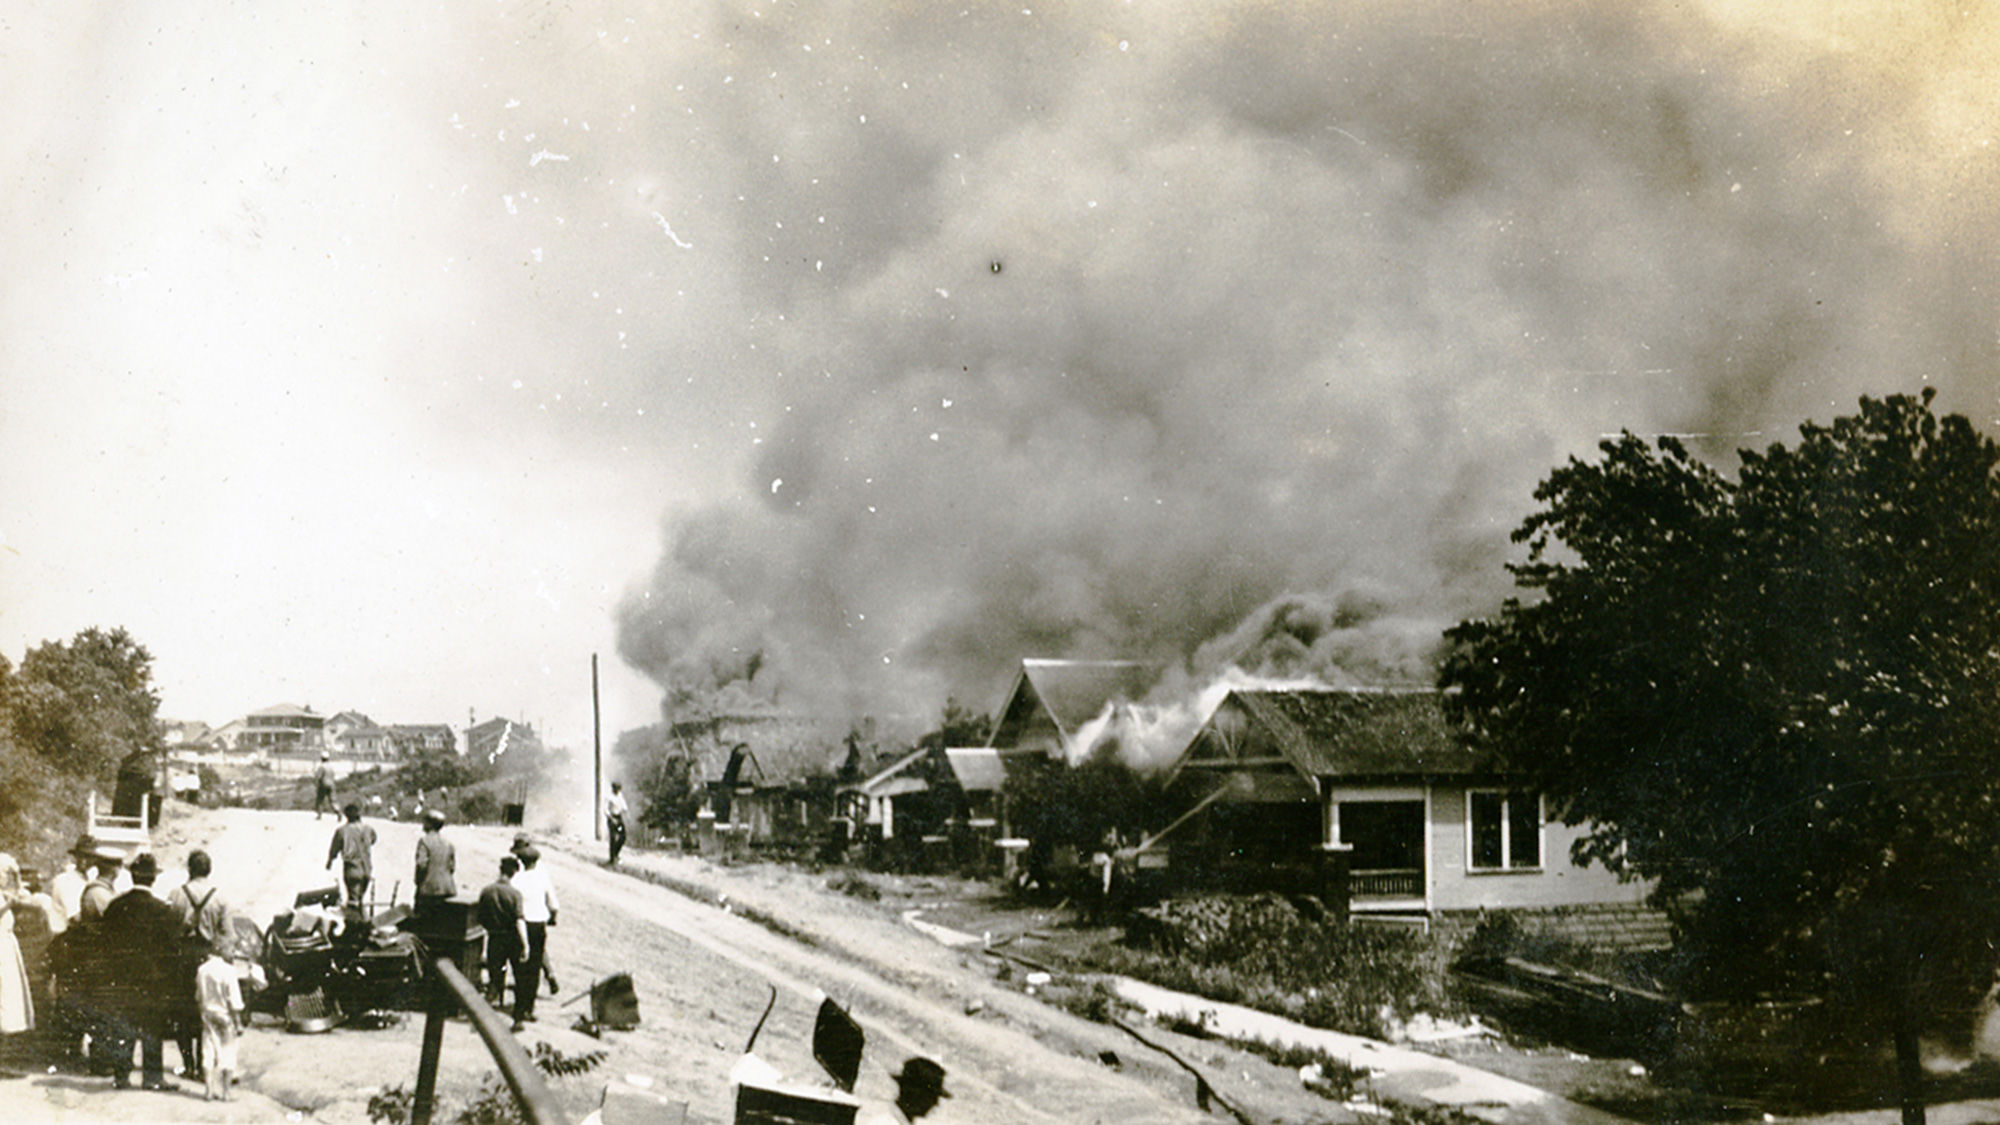 Tulsa’s 'Black Wall Street': Before, During and After the Massacre